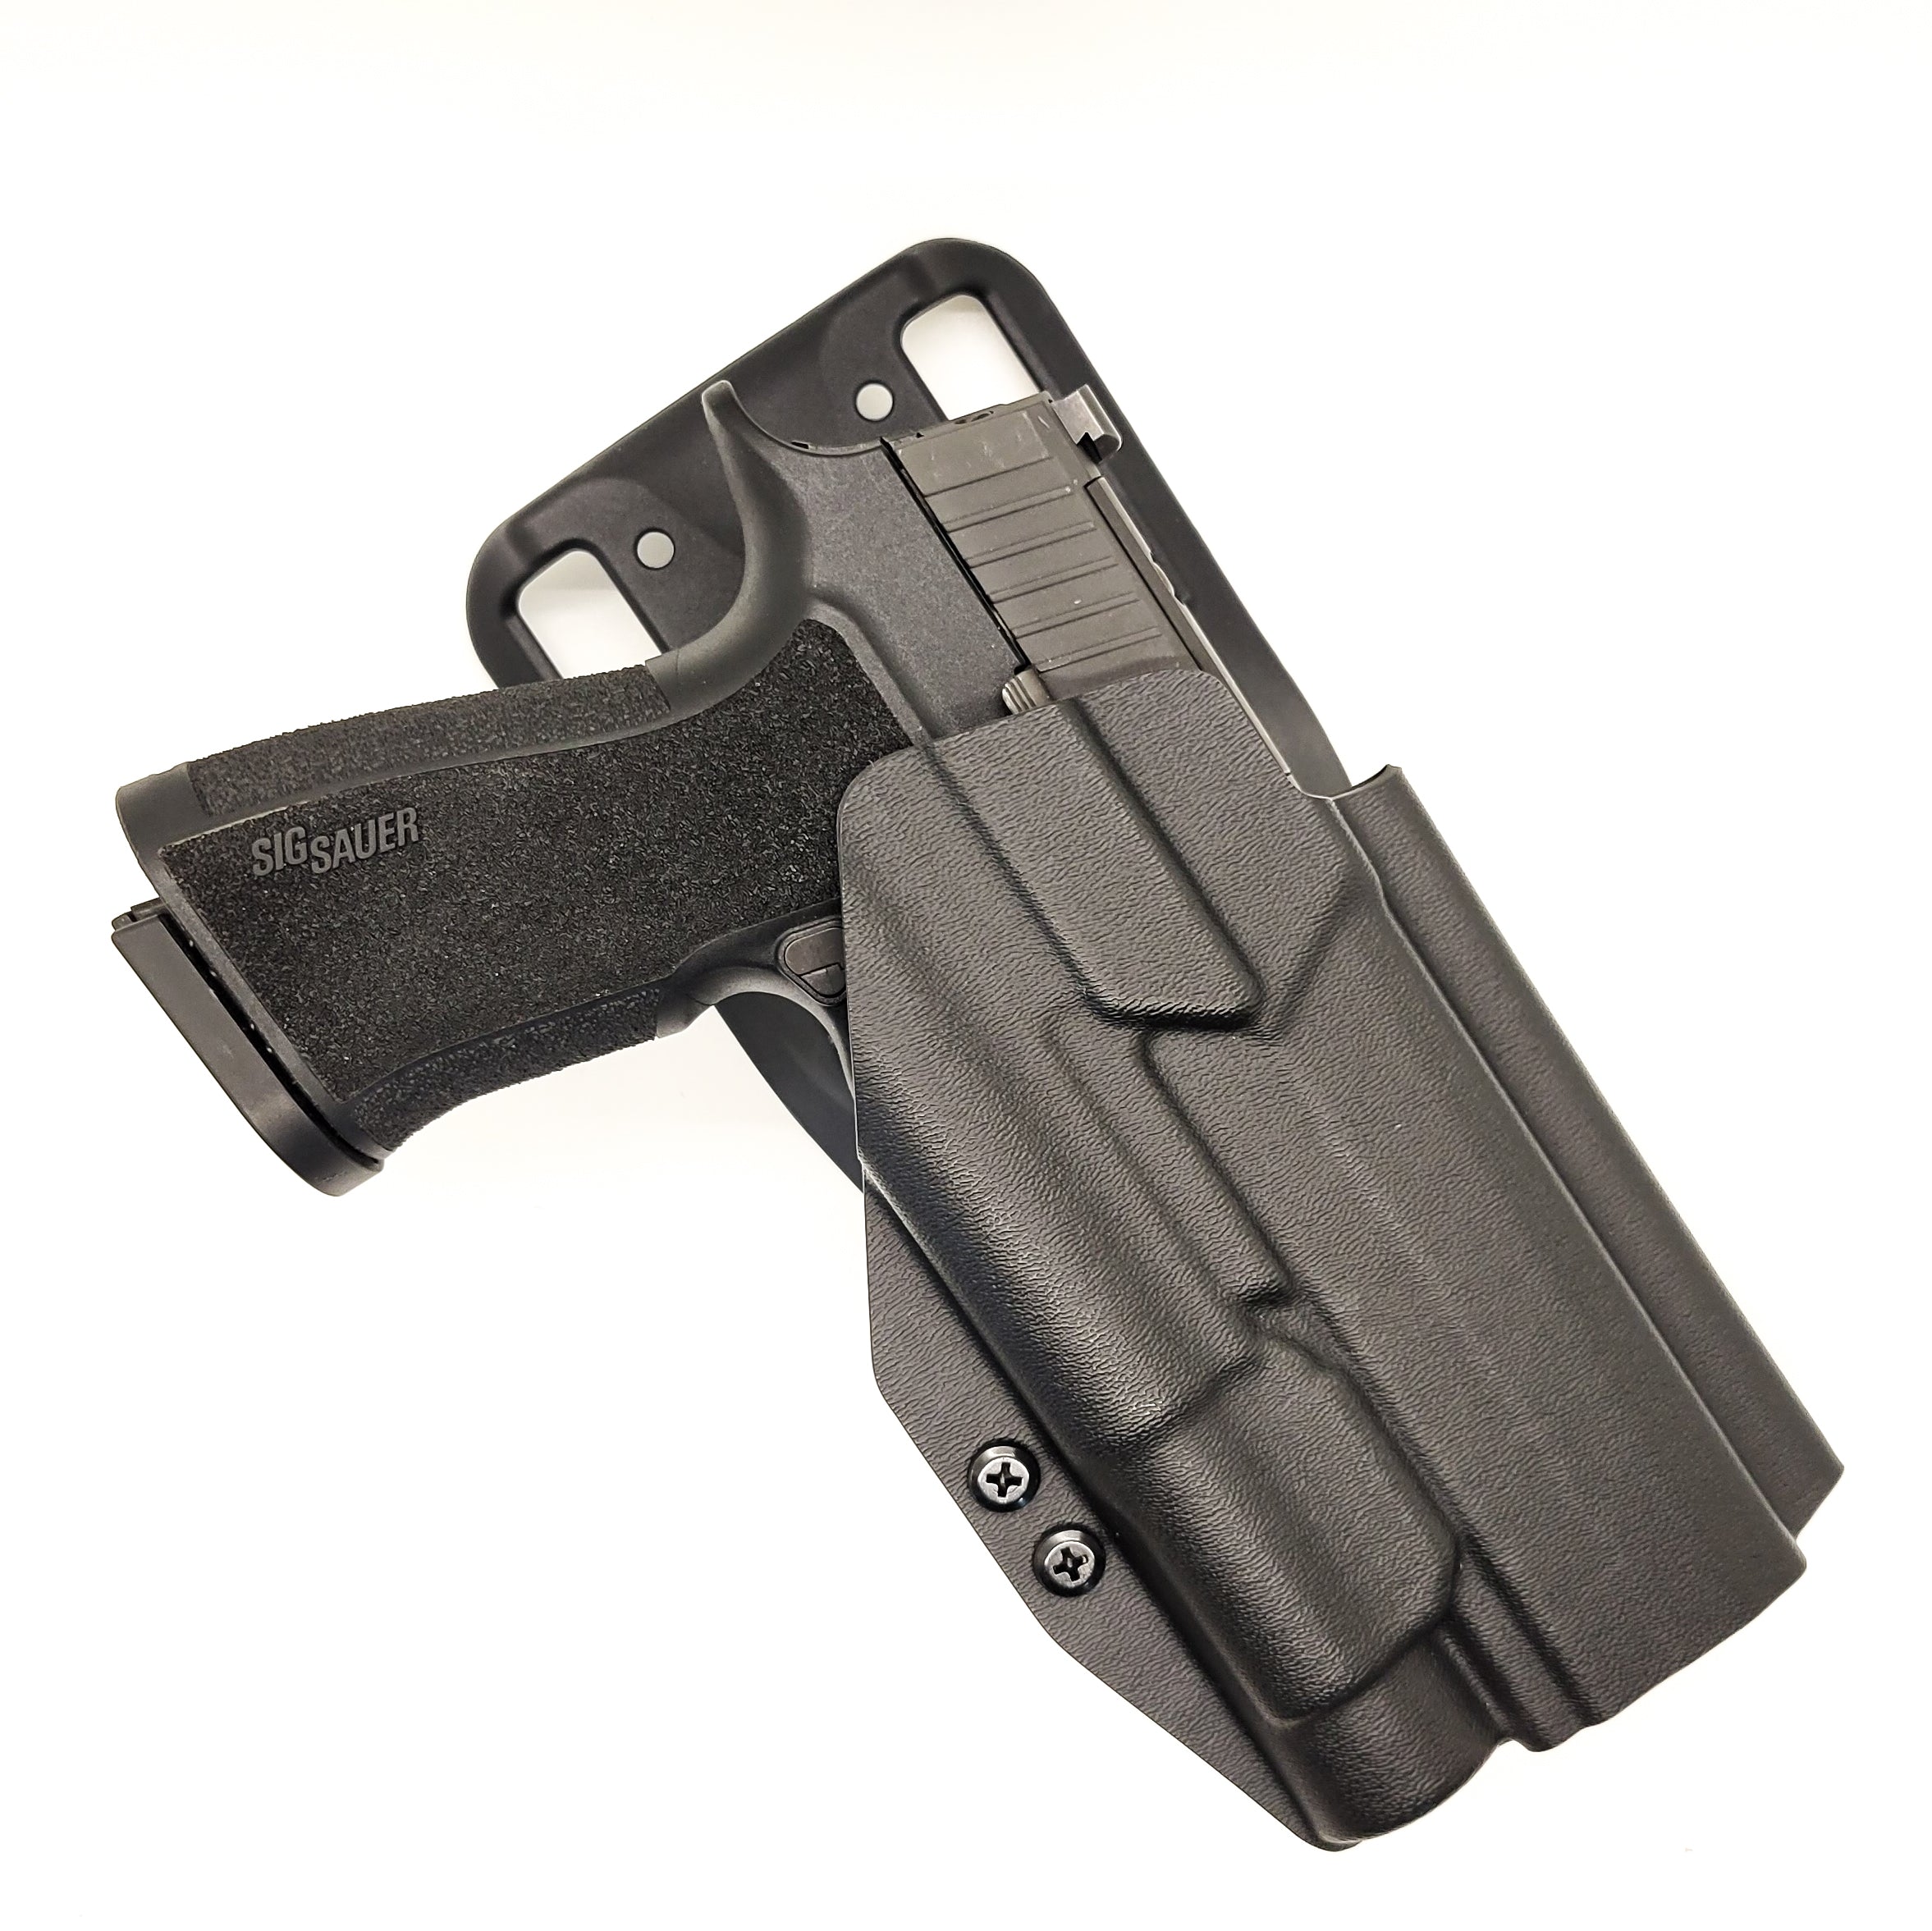 Outside Waistband Duty and Competition Style Kydex Holster designed to fit the Sig Sauer P320-XTEN with the Streamlight TLR-1 or TLR-1 HL attached to the pistol. Open Muzzle, Full Sweat Guard, Adjustable Retention. Profile cut for red dot sights optics on the pistol. Made in the USA. P 320 XTen X Ten X10 X 10 10MM